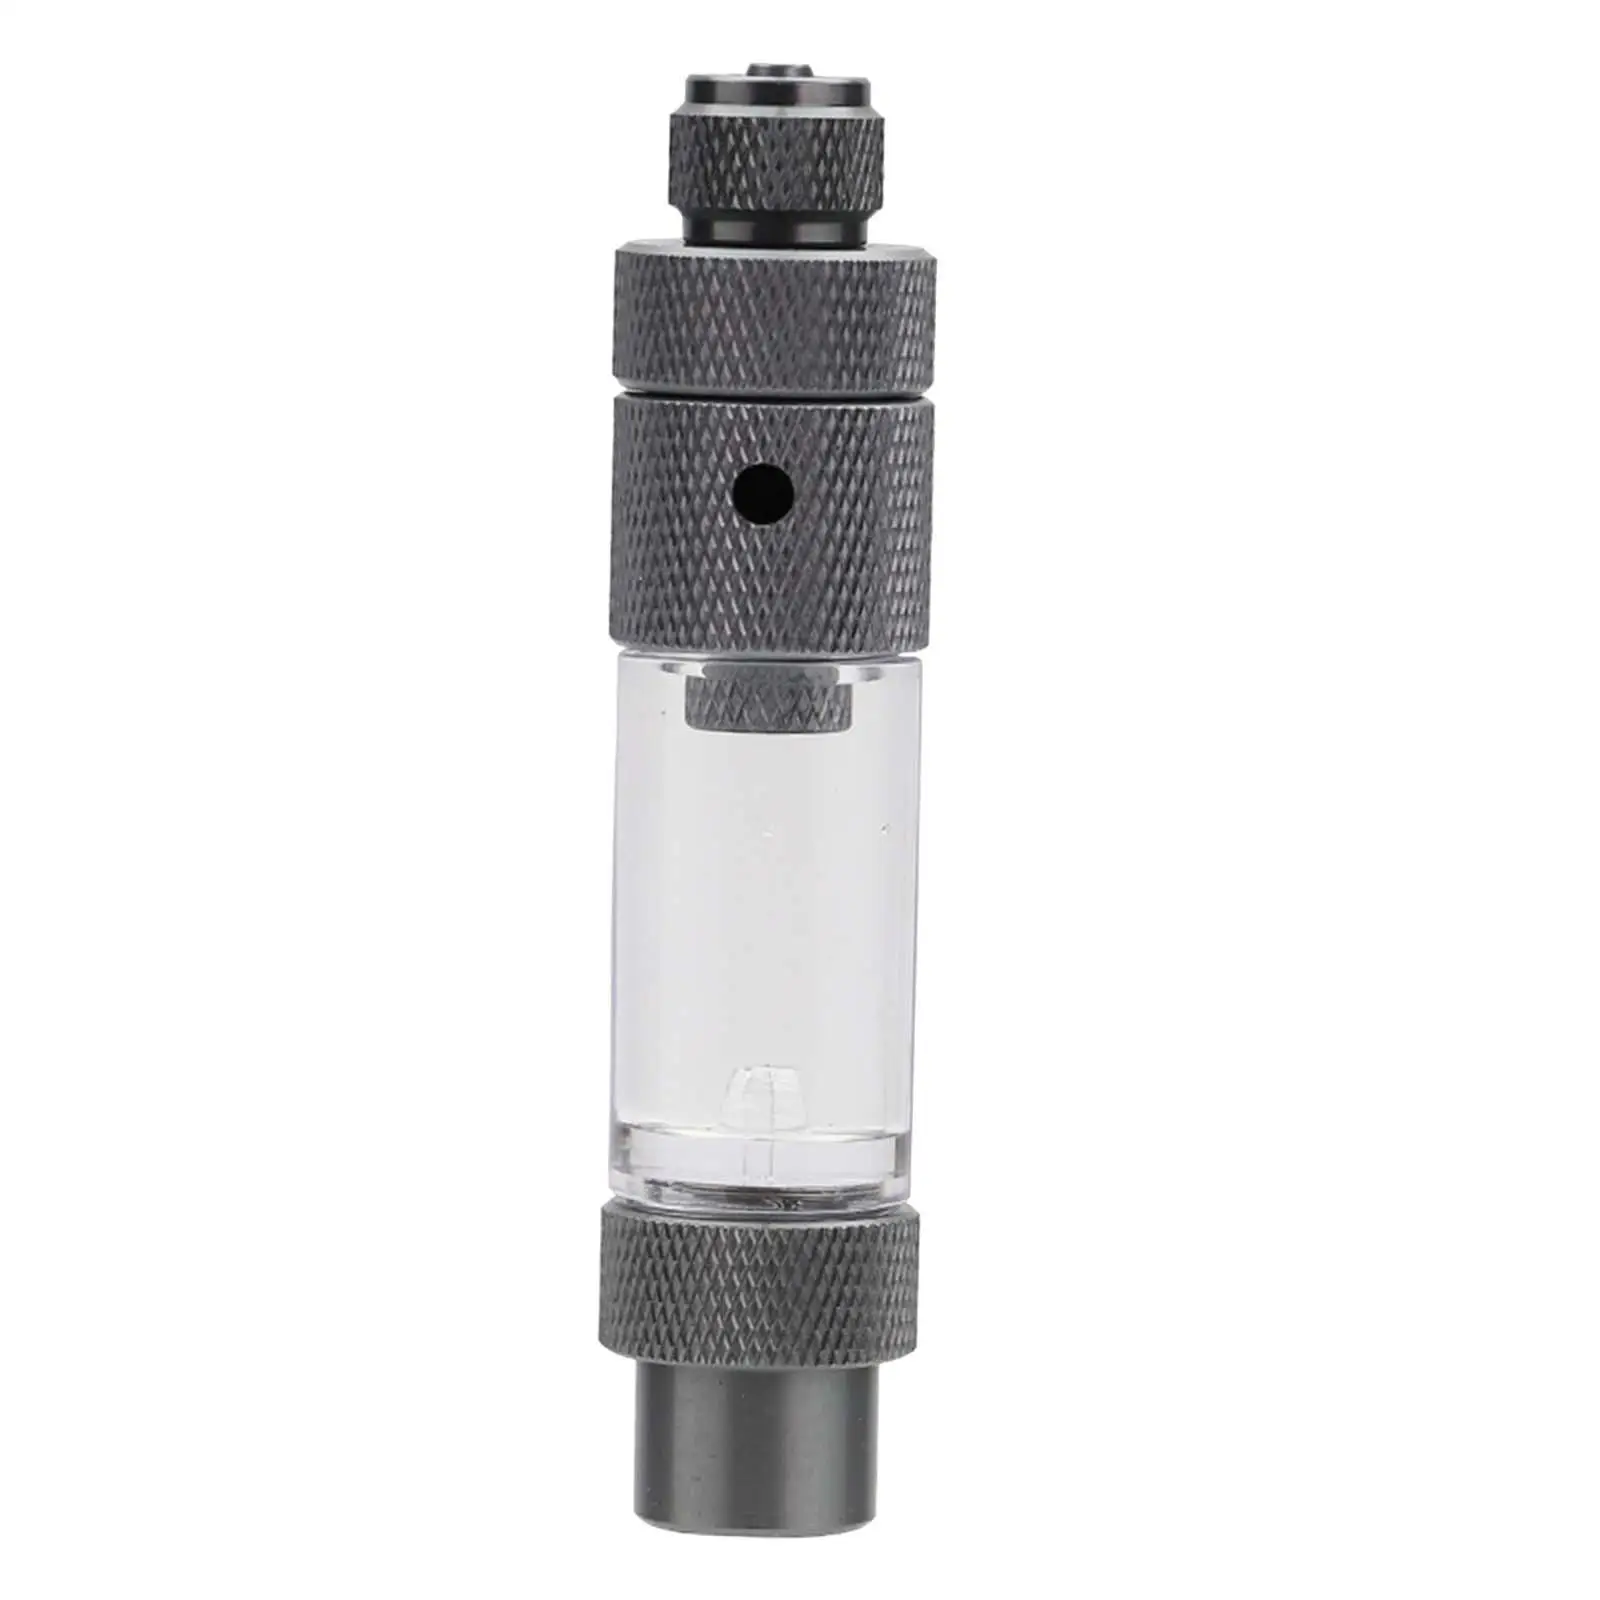 Aquarium CO2 Bubble Counter Portable CO2 Regulator Clear Tube Multifunction Attachments Easy to Use with Check Valves Non Return